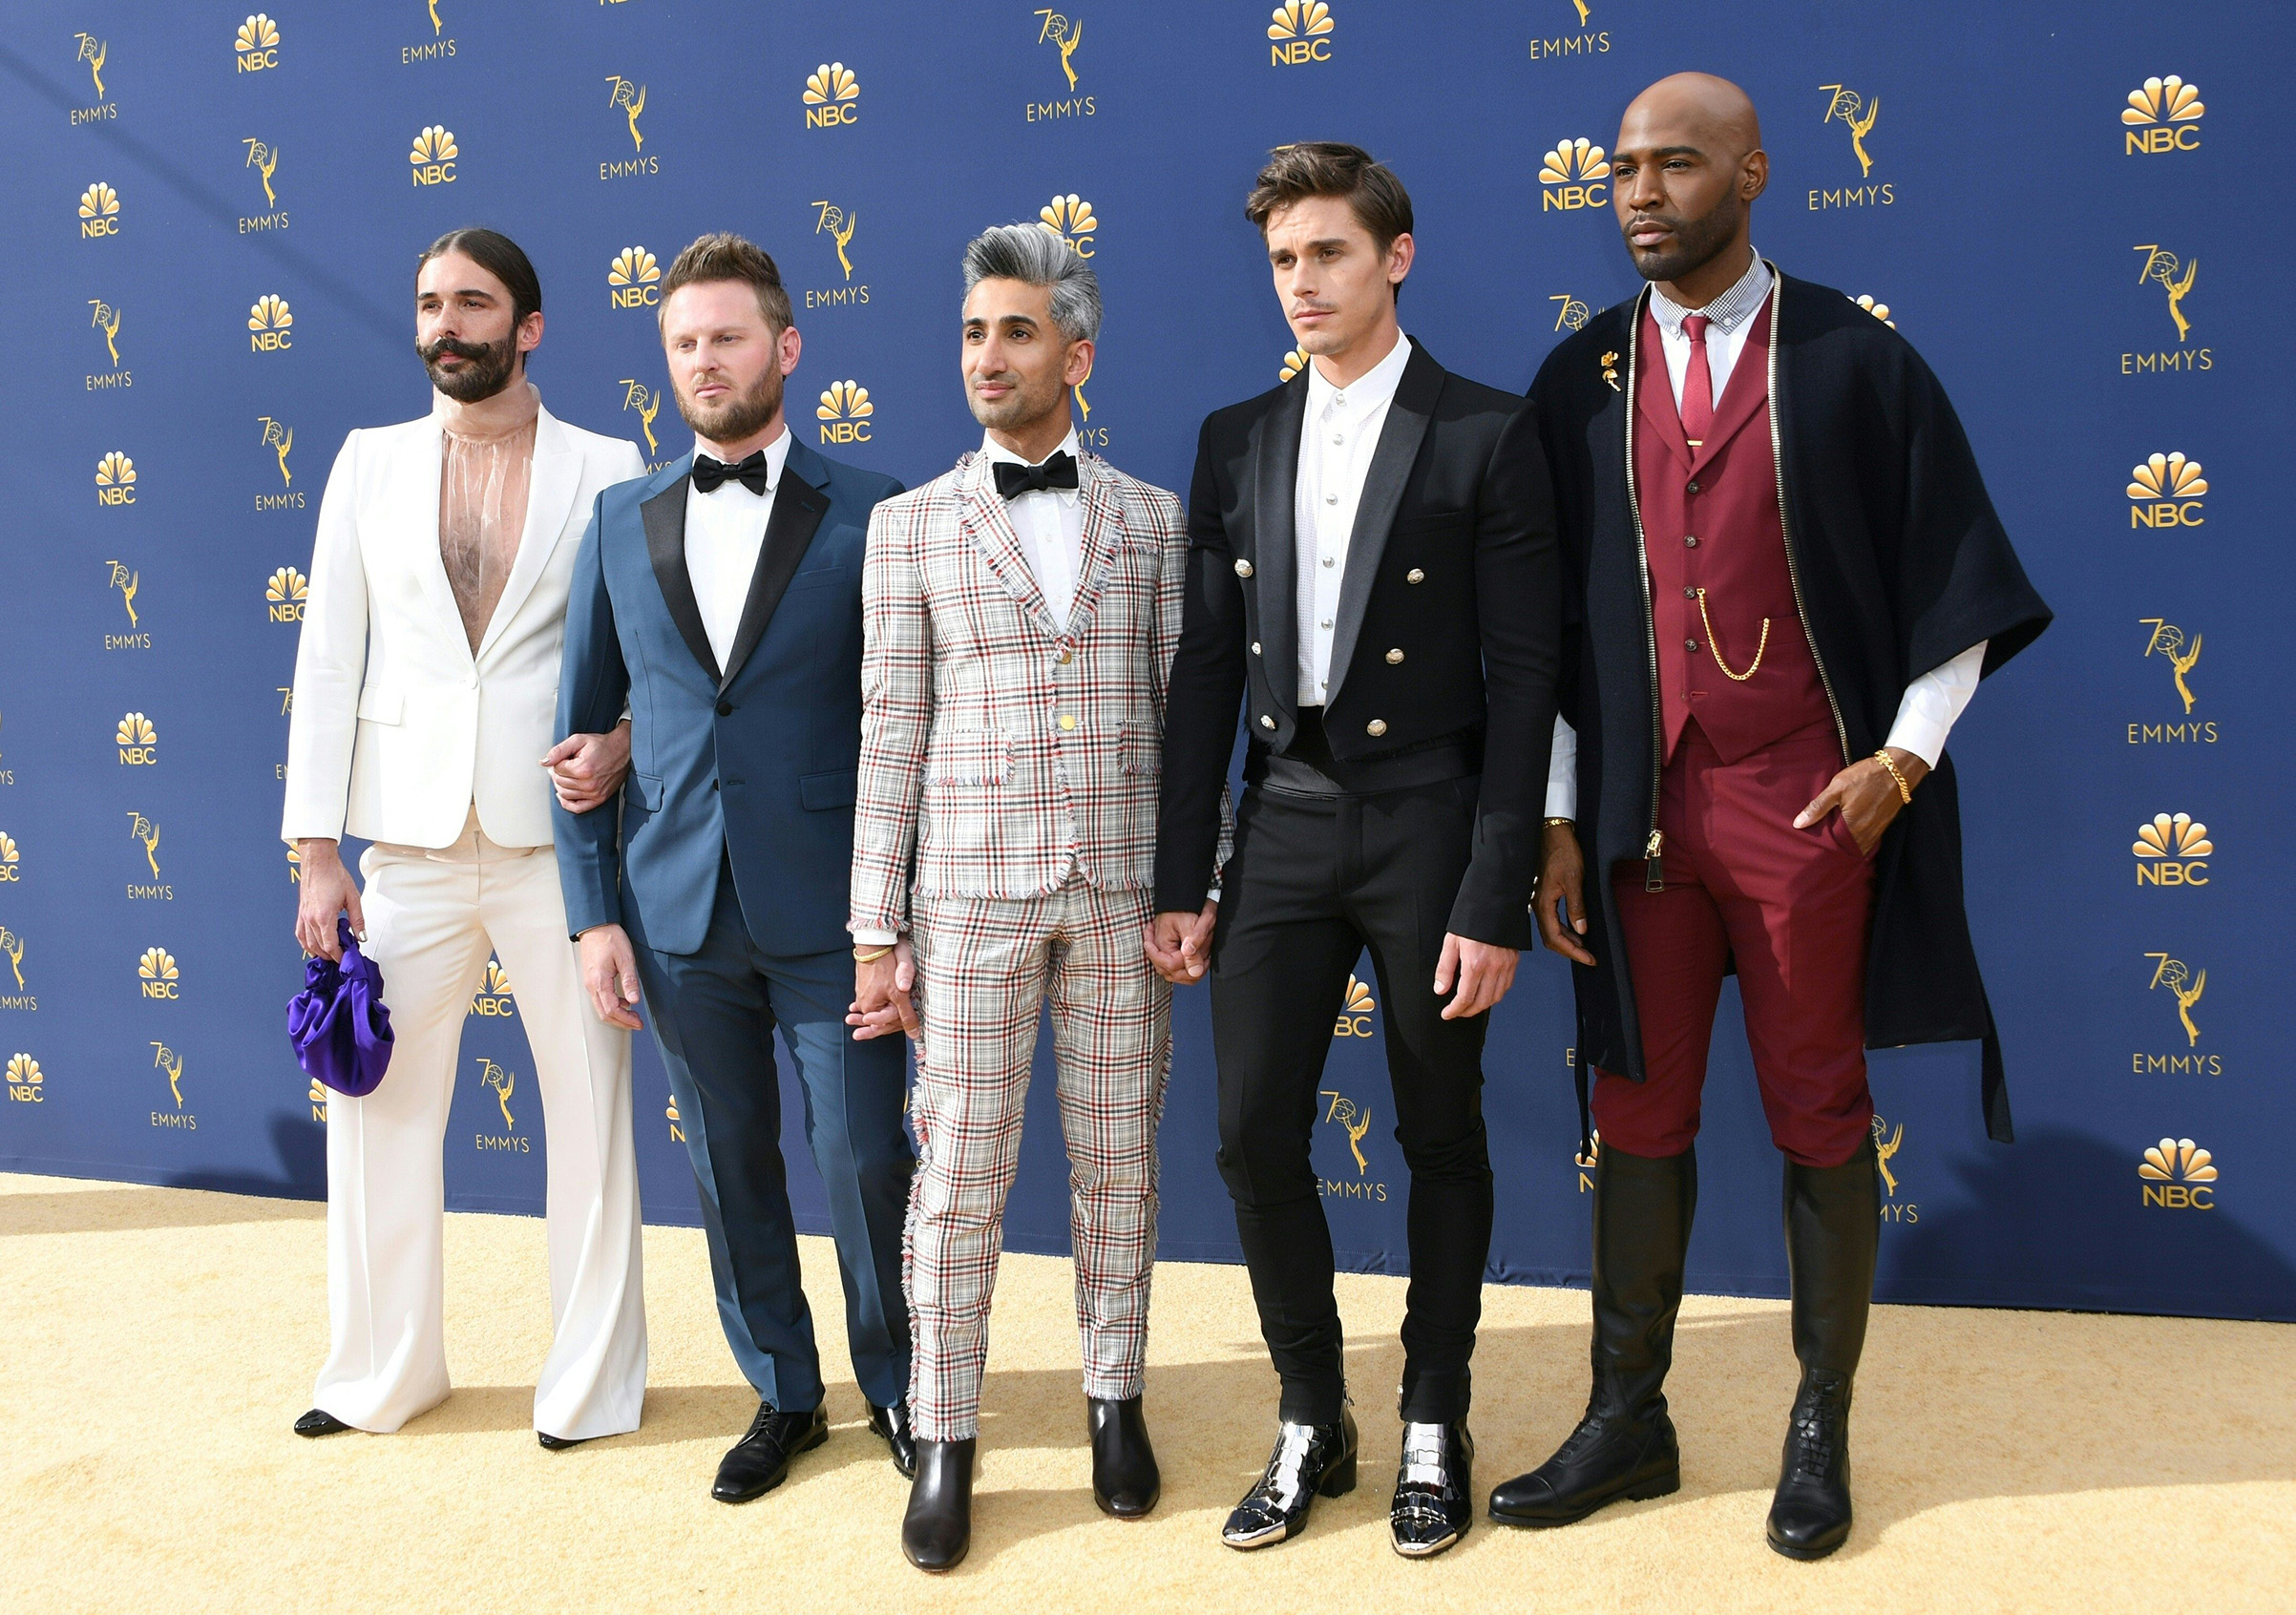 The cast from "Queer Eye" Jonathan Van Ness, Bobby Berk, Tan France, Antoni Porowski and Karamo Brown arrive at the 70th Emmy Awards on Sept. 17. (Valerie Macon—AFP/Getty Images)